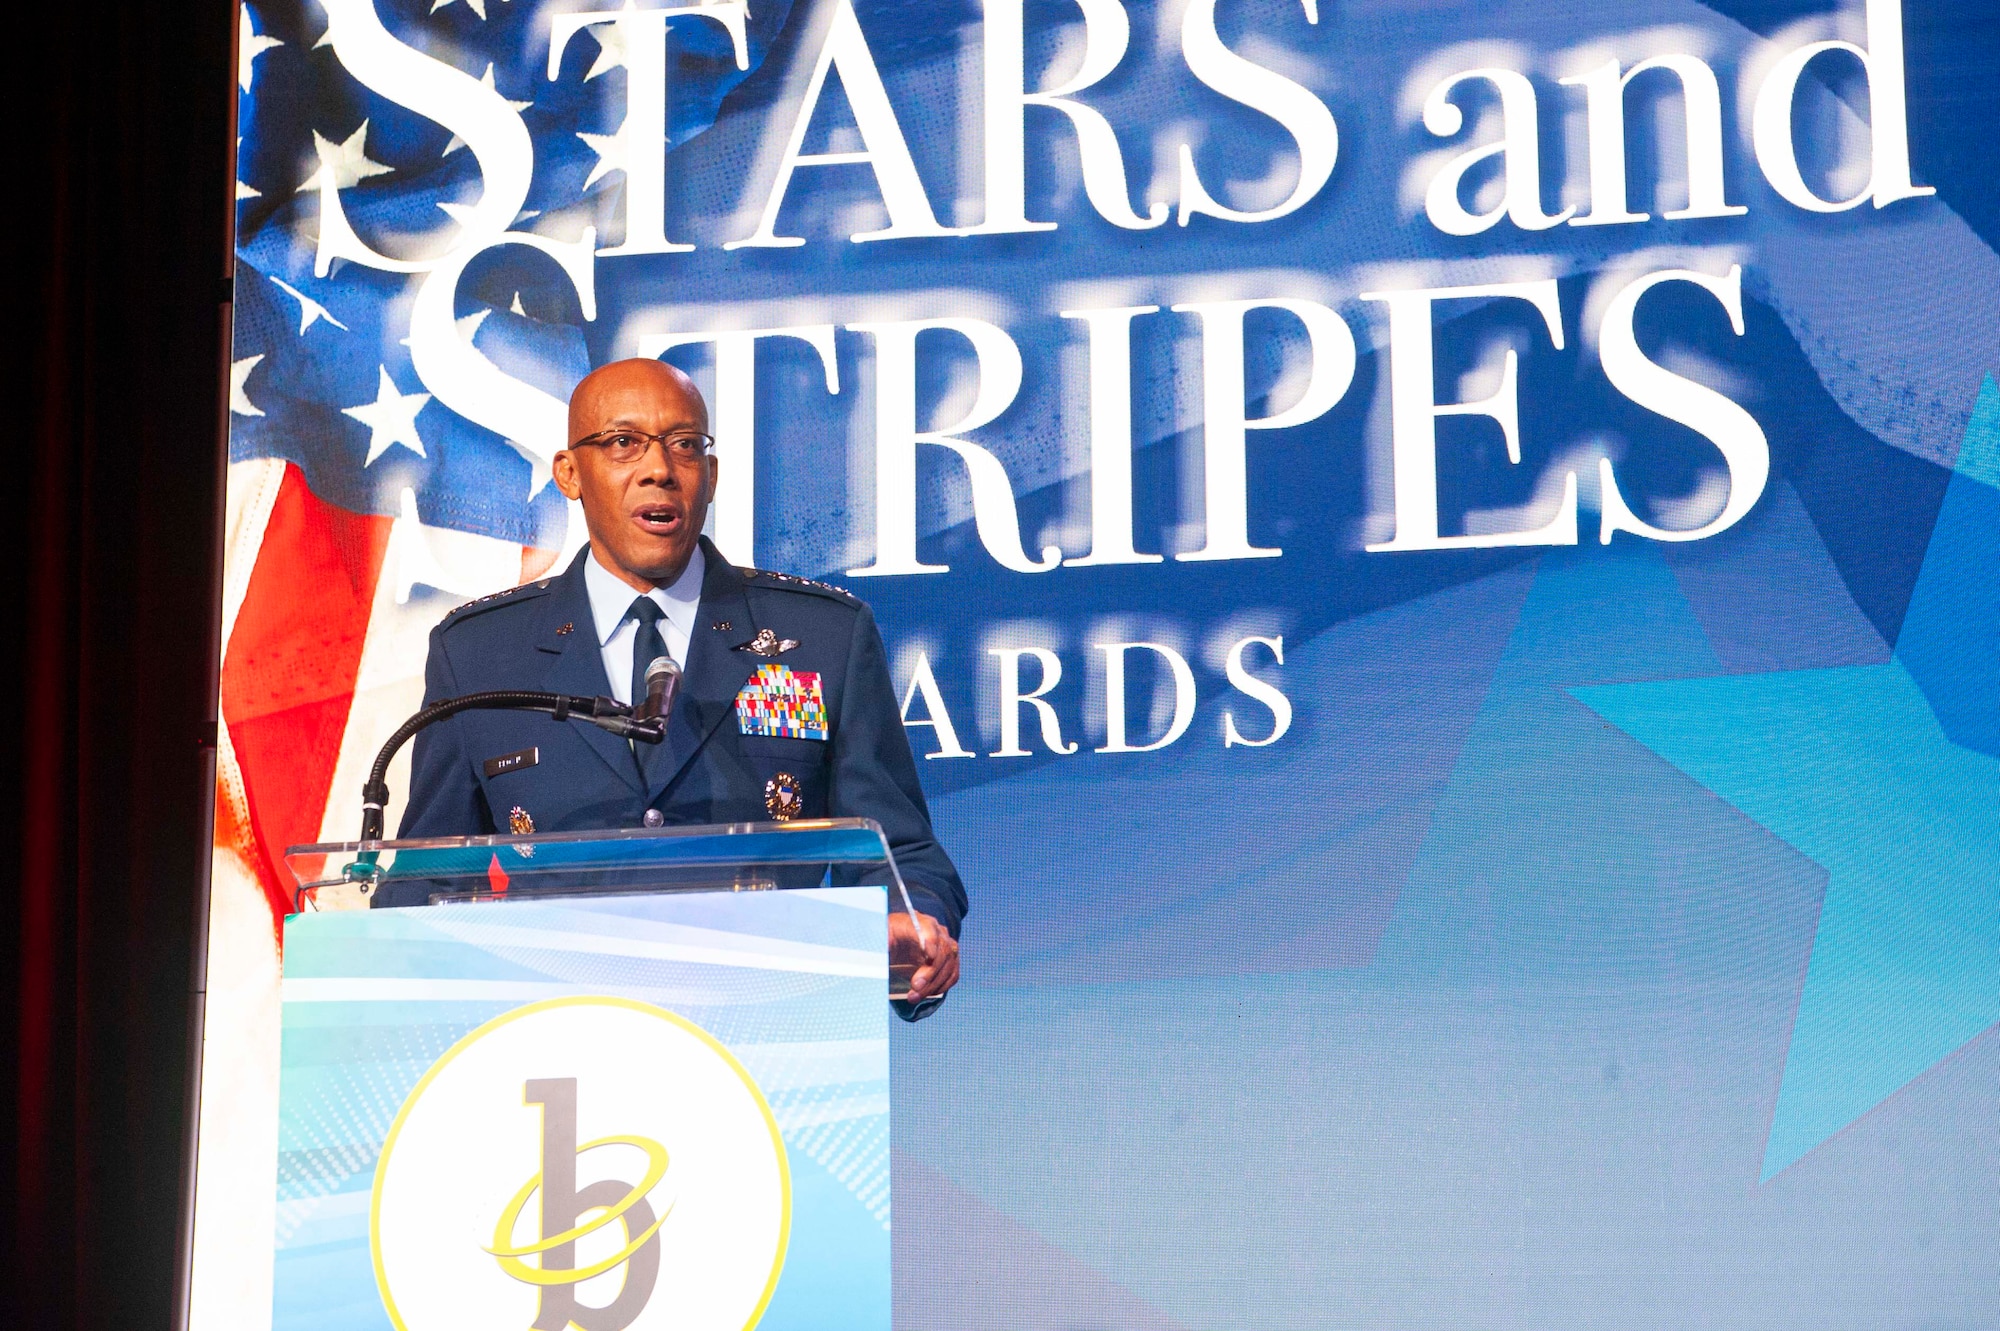 Air Force Chief of Staff Gen. CQ Brown, Jr. Gives the keynote address at the Stars and Stripes Youth Mentoring session and award ceremony as part of the 2022 Black Engineer of the Year Science, Technology, Engineering and Mathematics conference in Washington, D.C., Feb. 18, 2022. The ceremony offered an opportunity to recognize the contributions of Airmen, Guardians and other Defense Department exemplars who have advocated and mentored in STEM-related fields. (U.S. Air Force photo by Staff Sgt. Nicolas Z. Erwin)